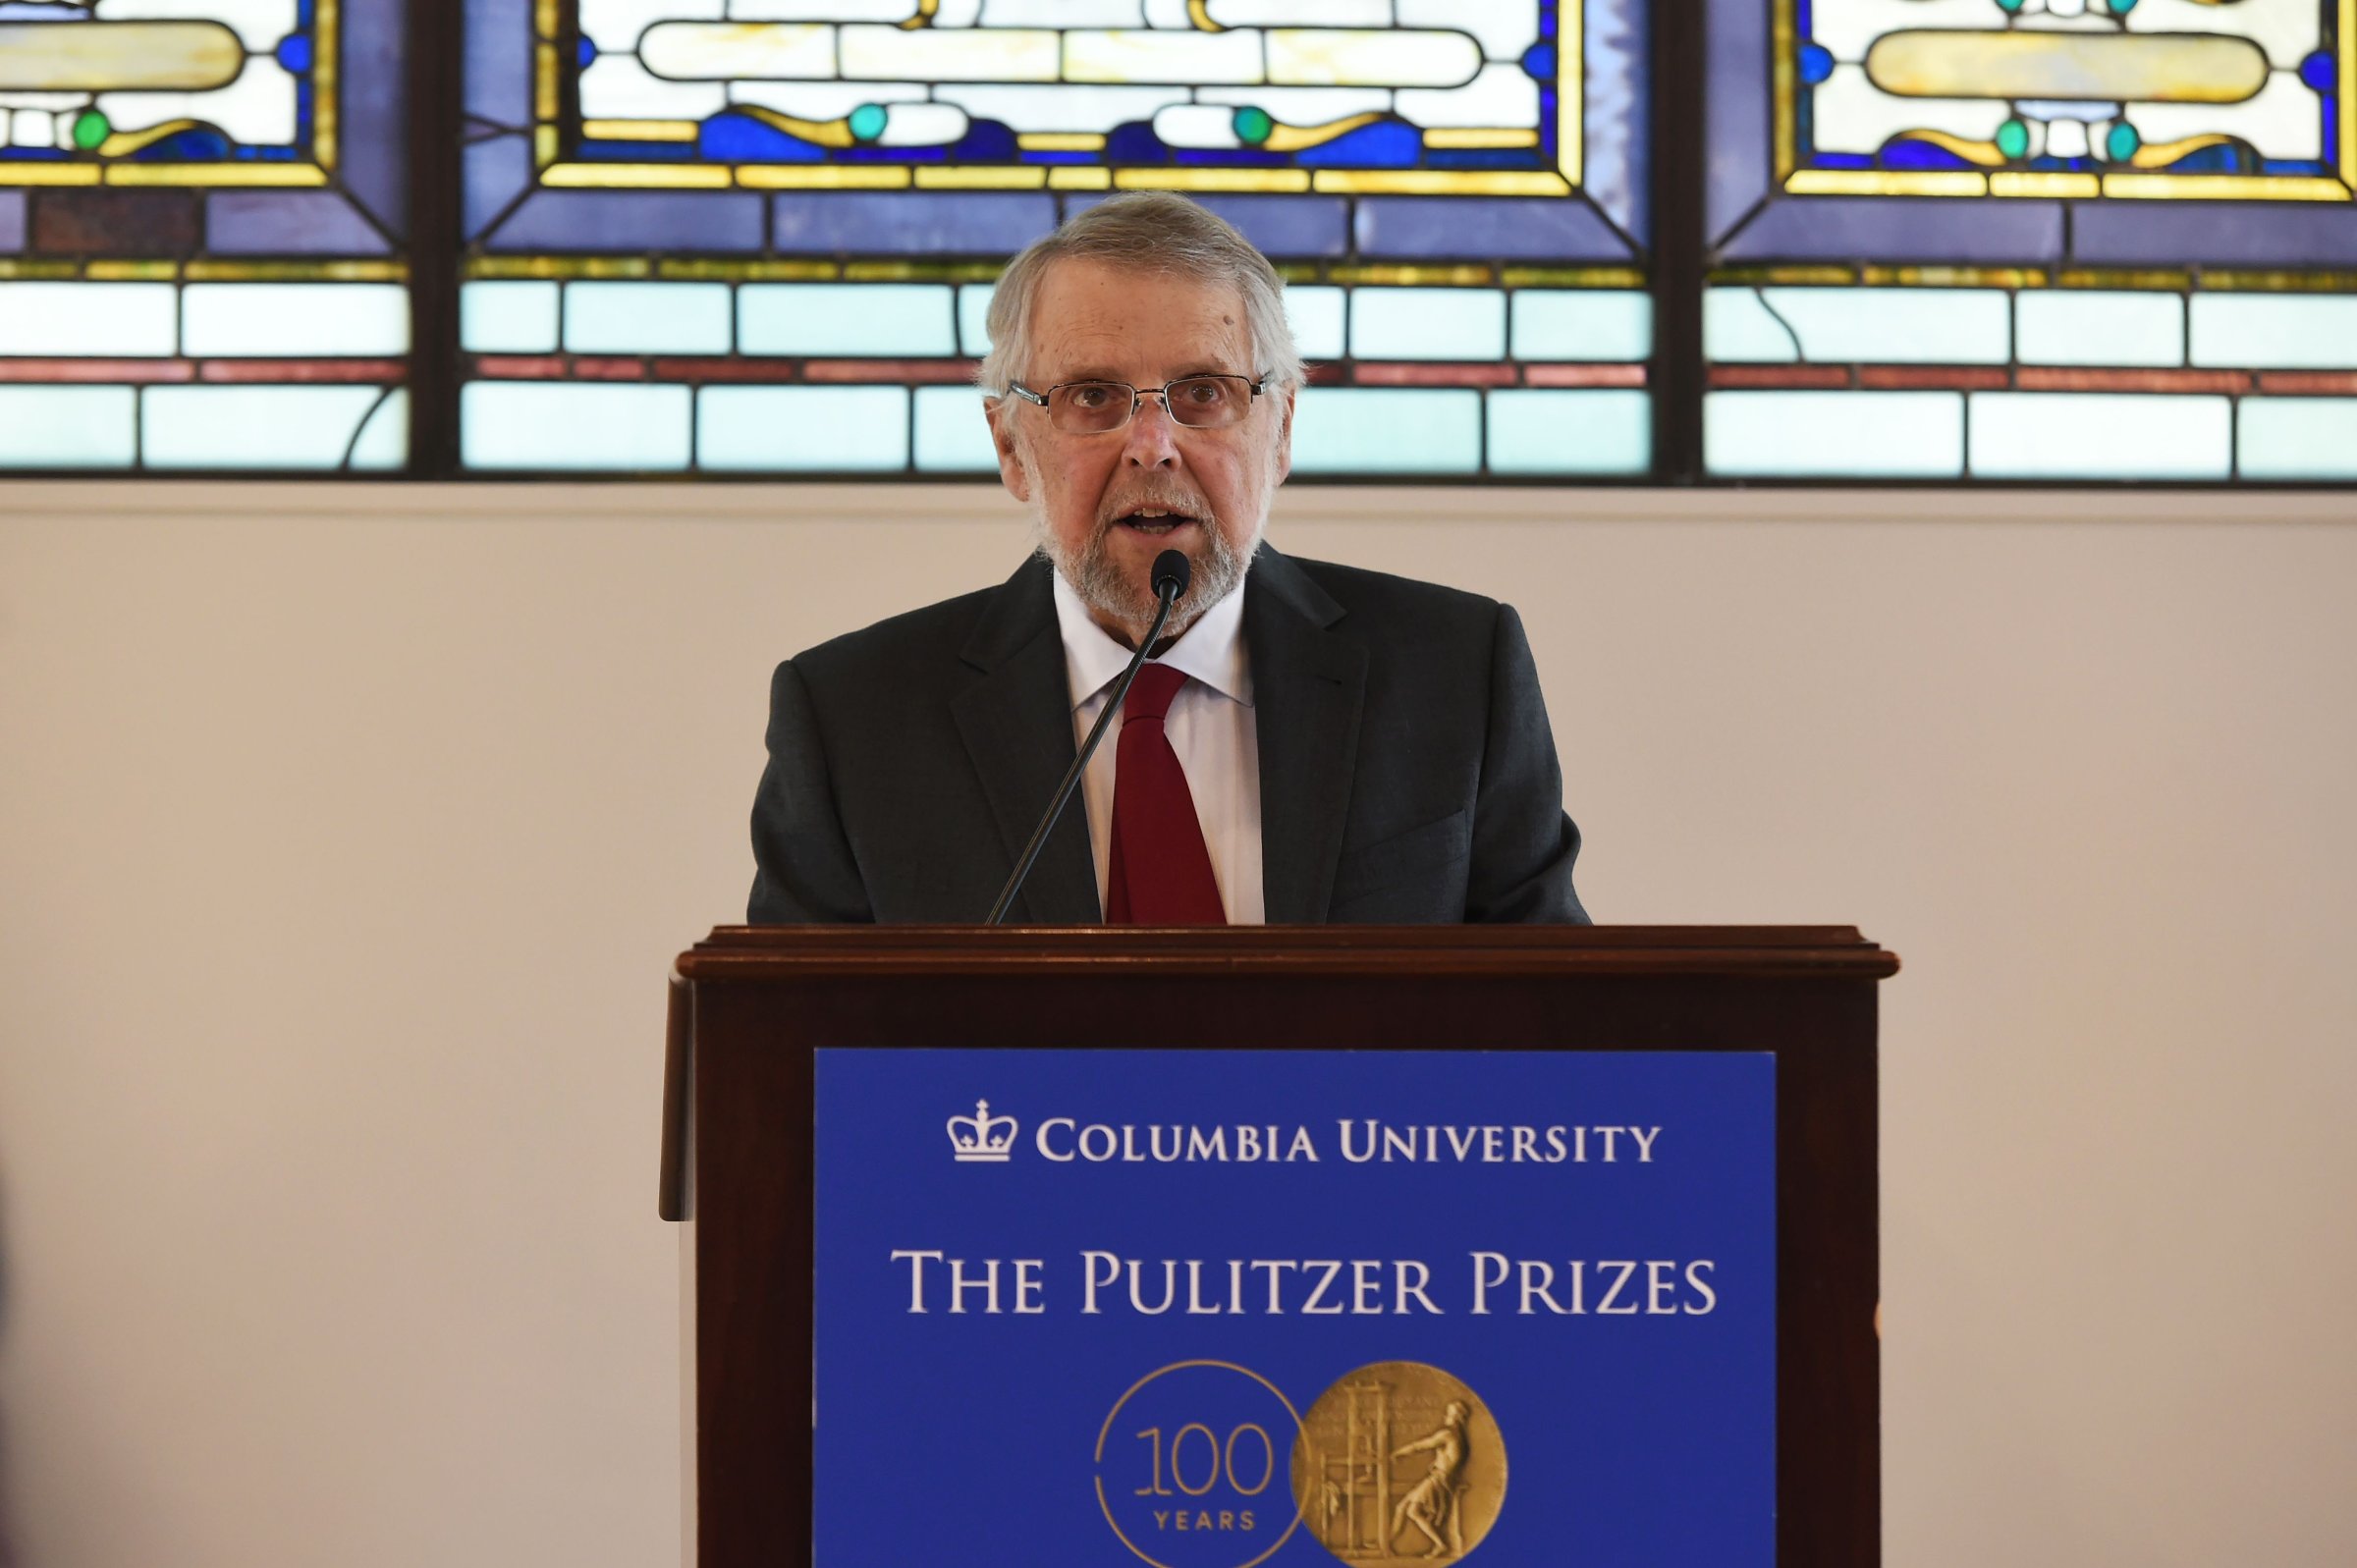 Mike Pride, administrator of The Pulitzer Prizes, announces the 2016 Pulitzer Prize winners at the Columbia University in New York on April 18, 2016.